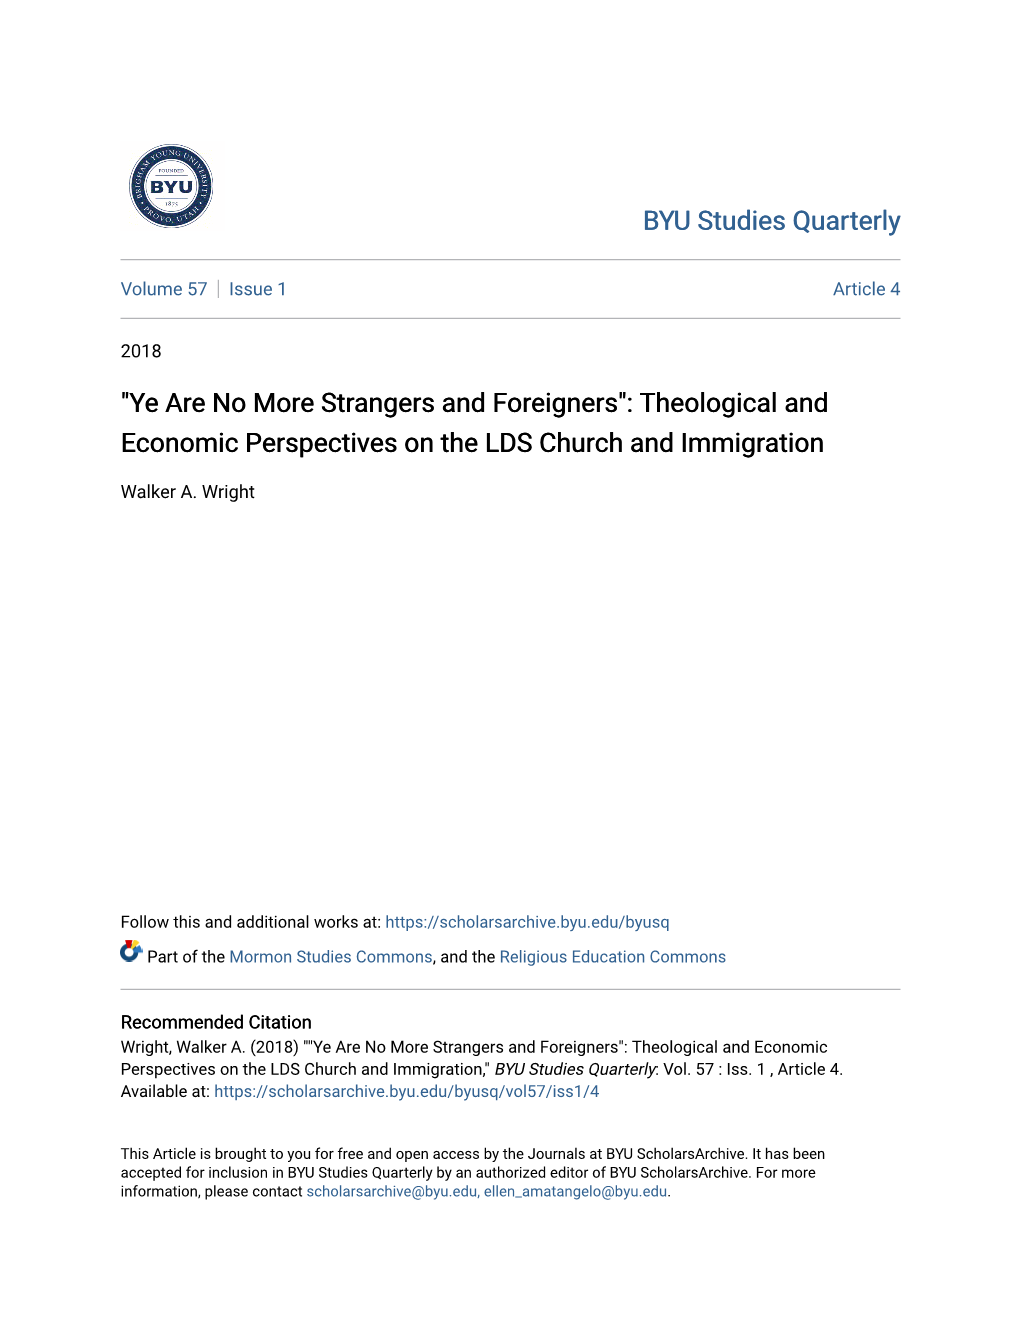 "Ye Are No More Strangers and Foreigners": Theological and Economic Perspectives on the LDS Church and Immigration